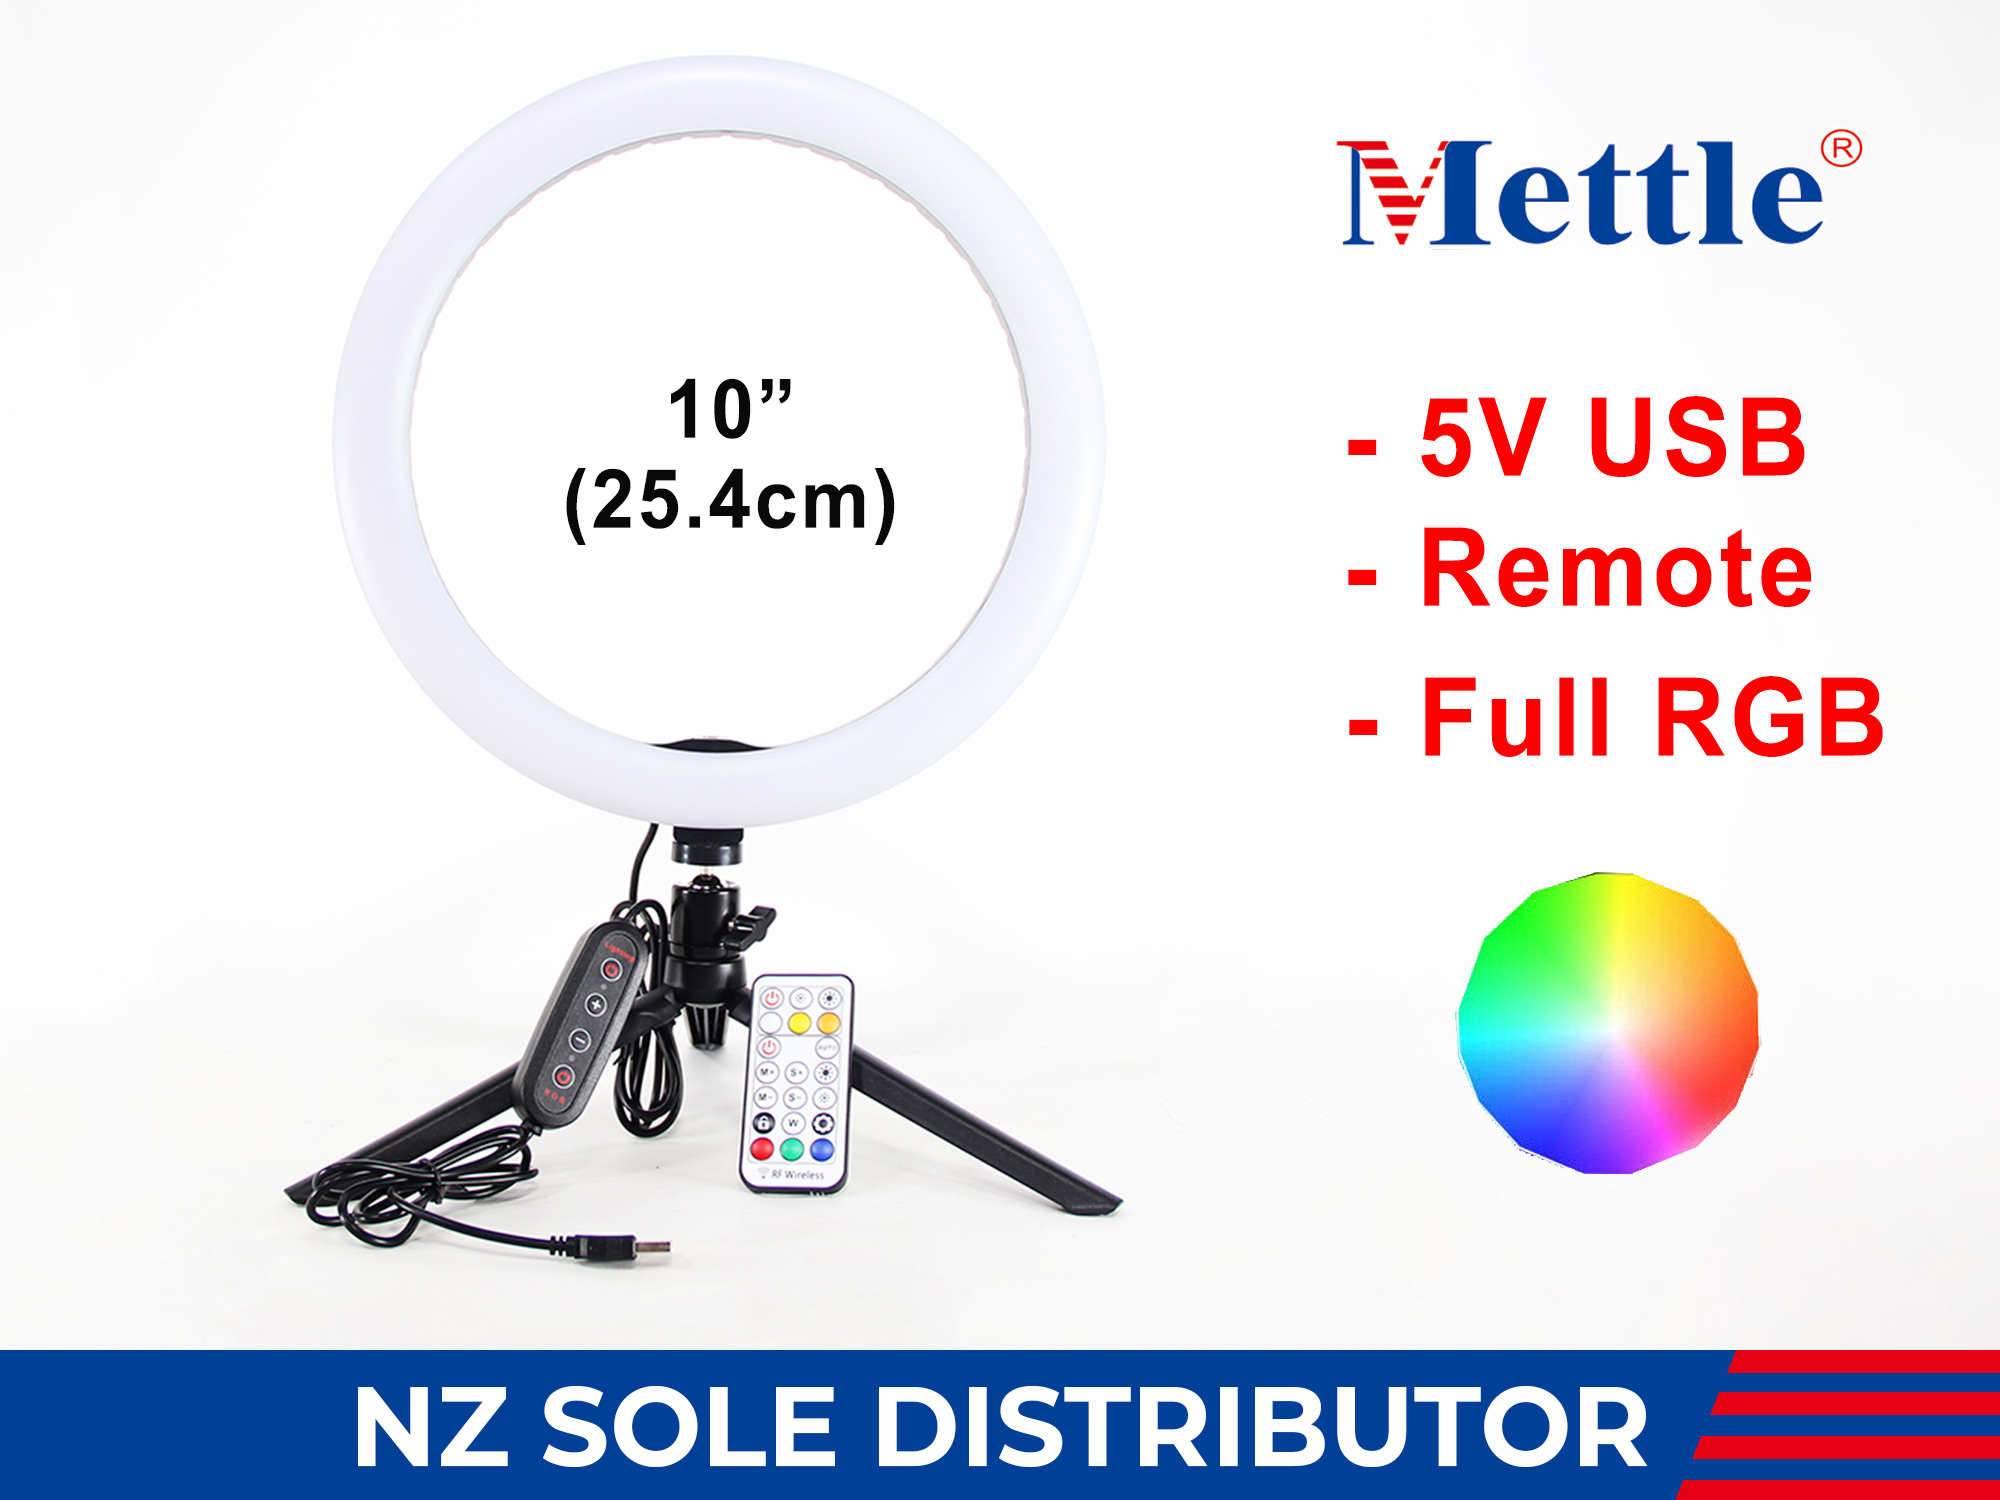 Mettle RGB LED 10" ring light + remote, Tripod, and flexible phone holder